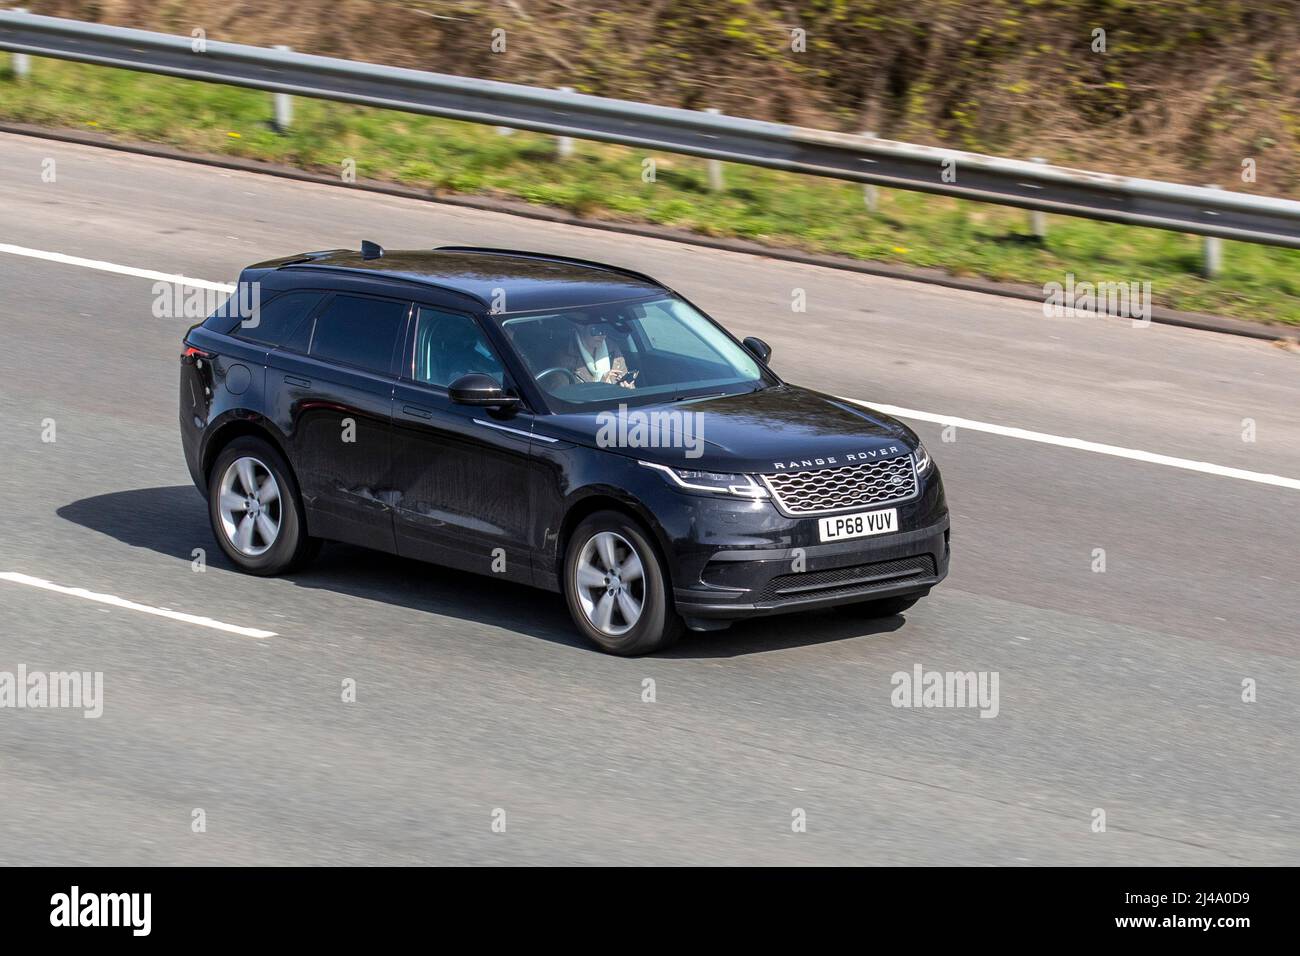 2018 black Land Rover Range Rover Velar R-Dynamic S 2993cc 8 speed automatic; driving on the M61 motorway, UK Stock Photo